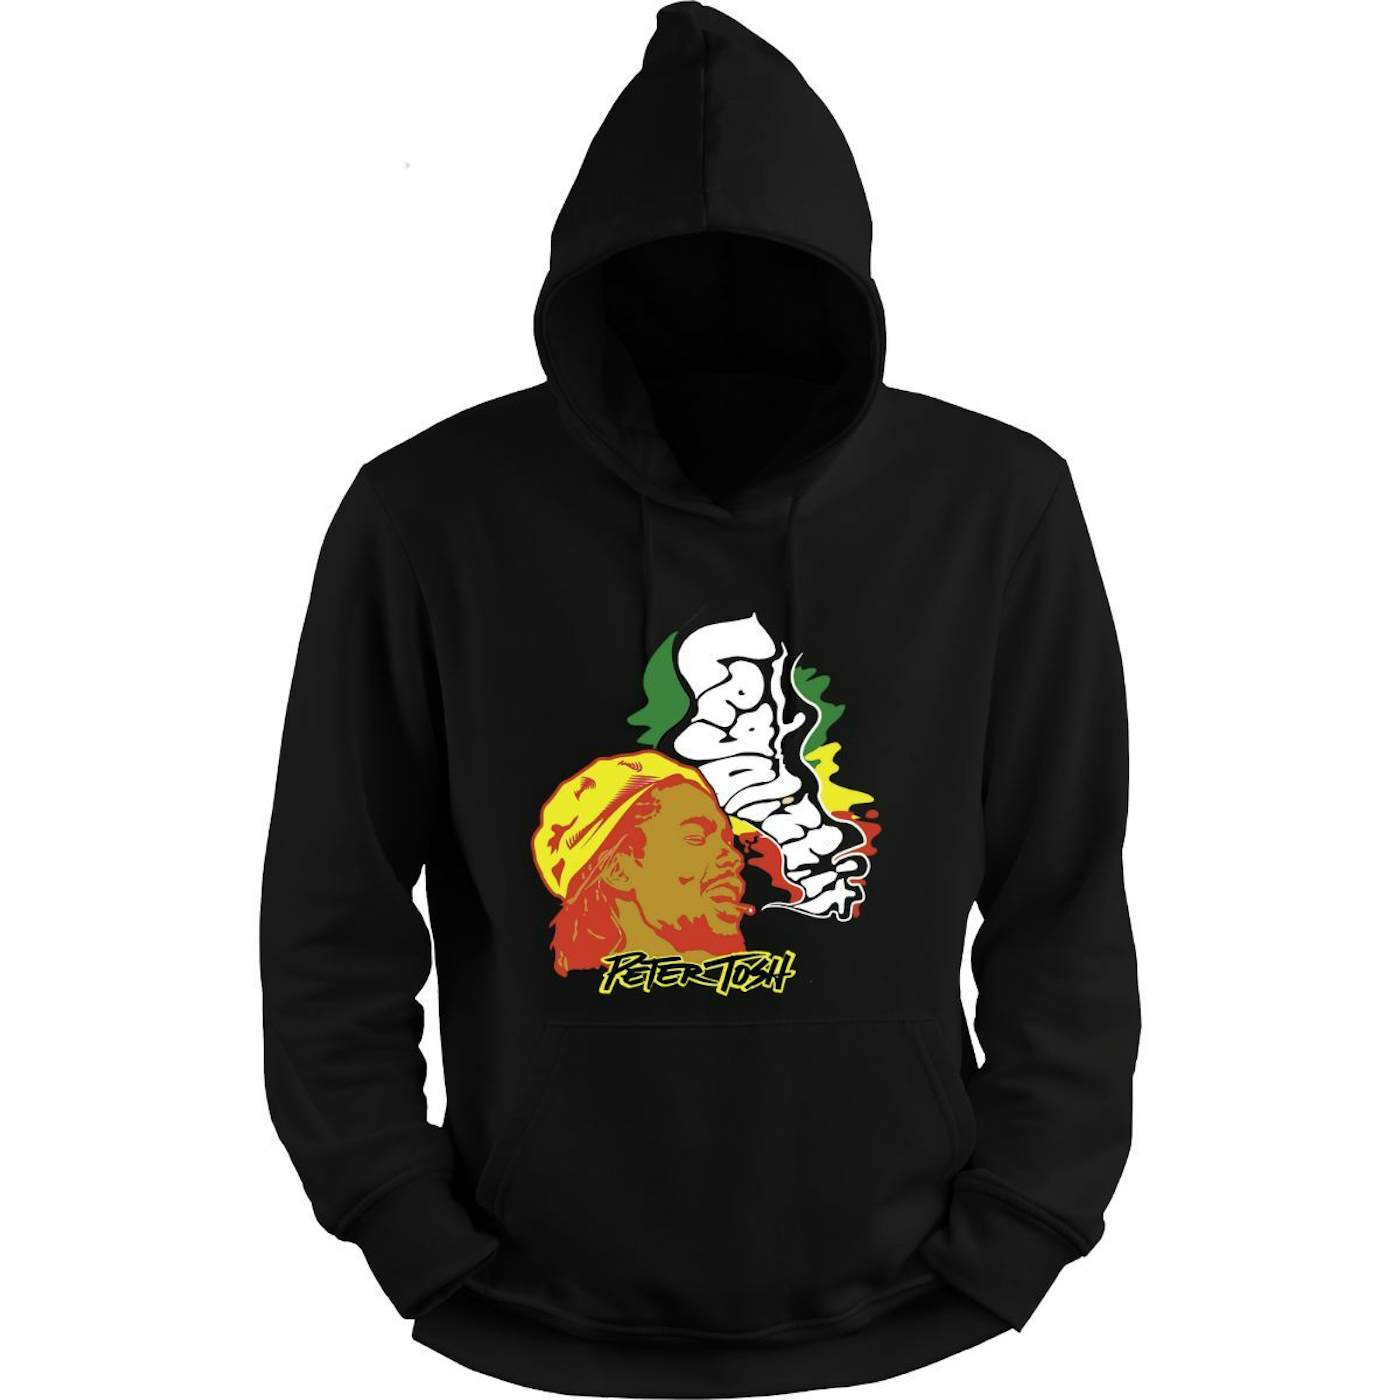 Up In Smoke Pullover Hoodie - Peter Tosh